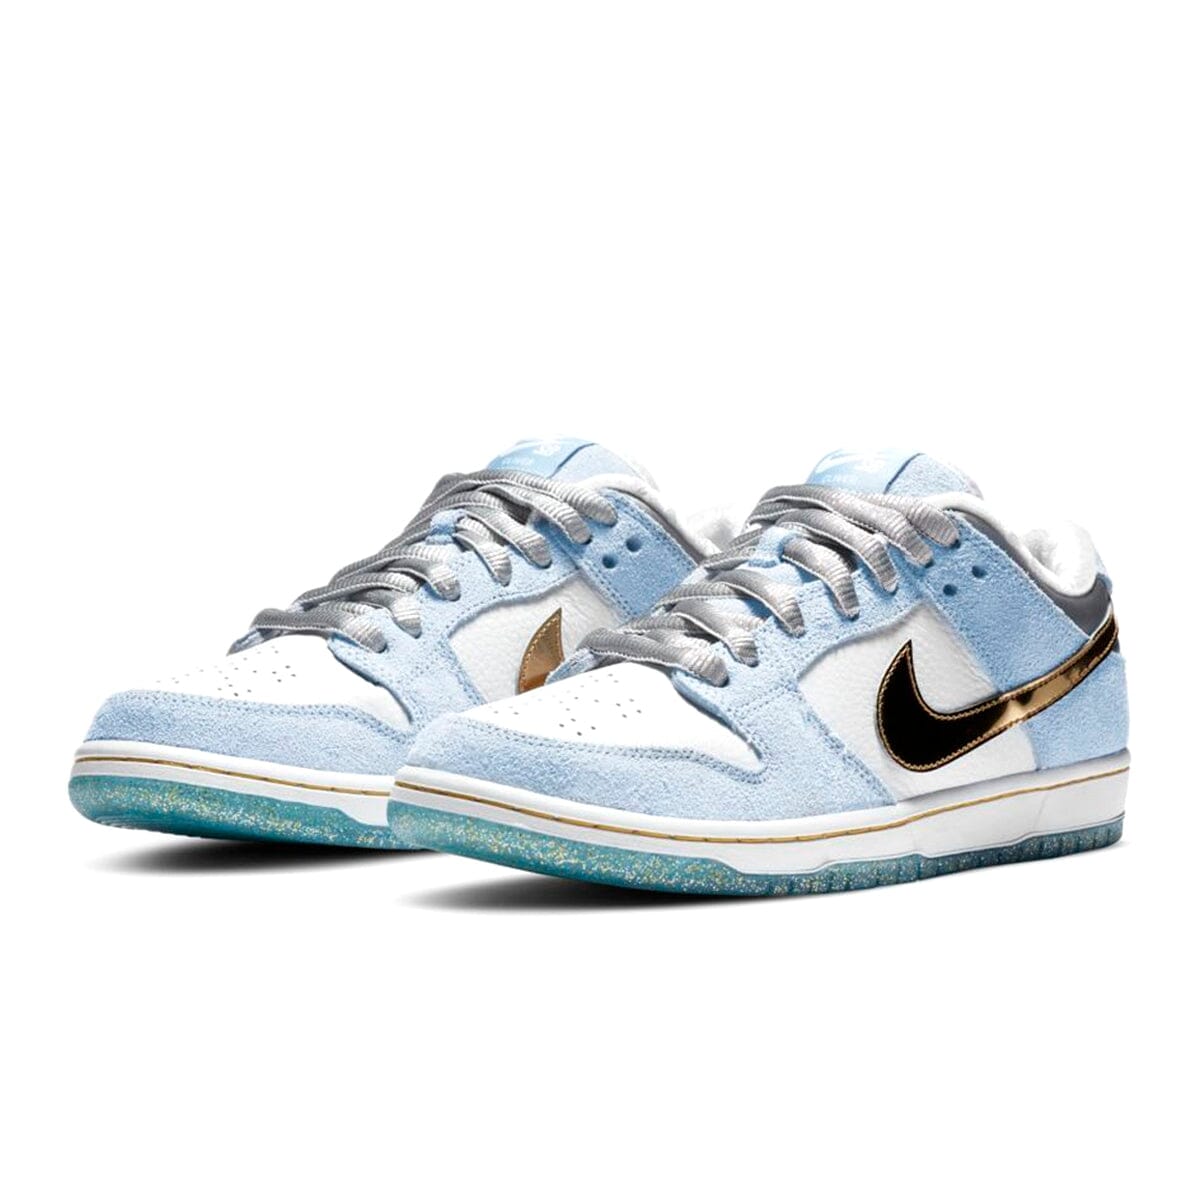 Nike SB Dunk Low Sean Cliver Nike Dunk Low Blizz Sneakers 